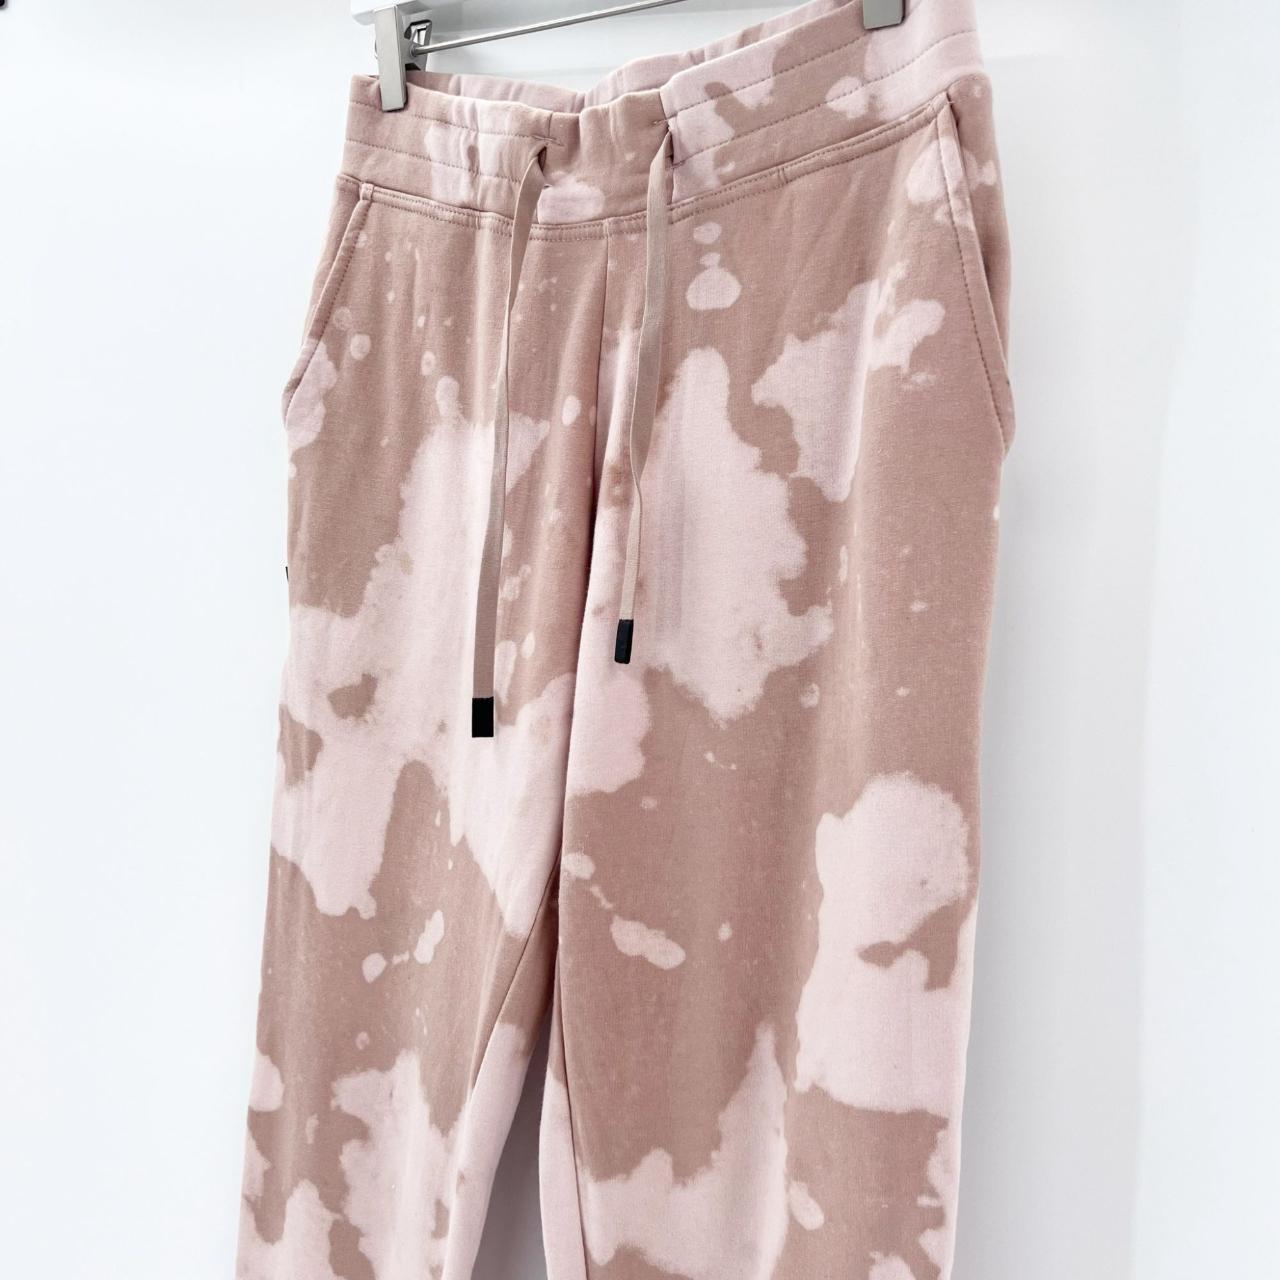 Product Image 2 - Stance Women's Pink Tan Cow